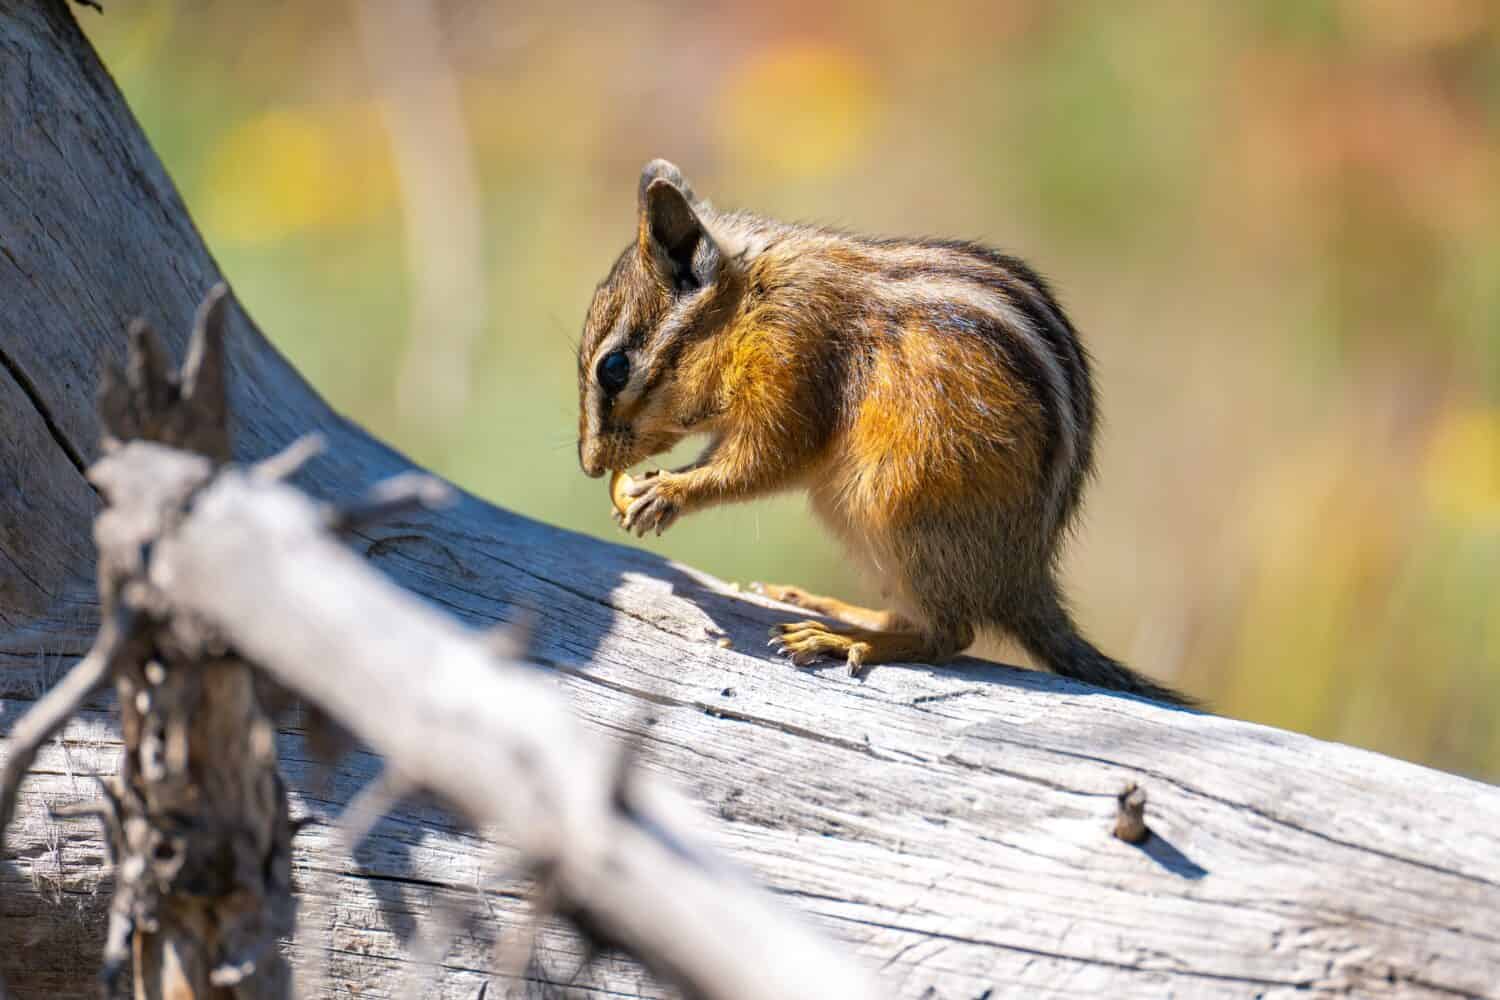 Yellow-pine chipmunk (Tamias amoenus) sitting on a tree log and eating a nut, Yellowstone National Park.